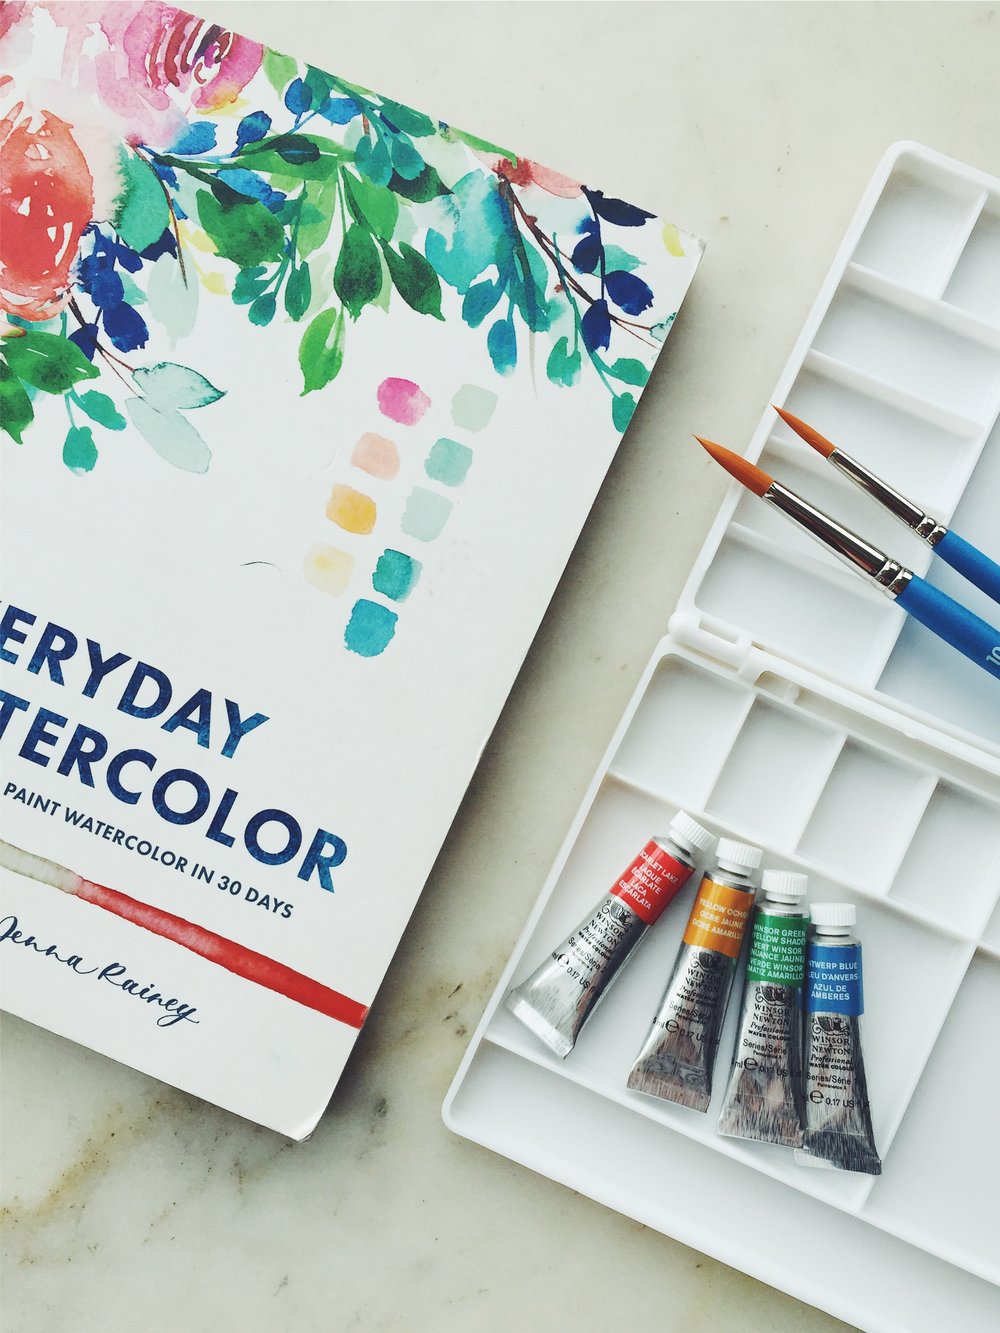 Everyday Watercolor - Learn to Paint Watercolor in 30 Days by Jenna Rainey  